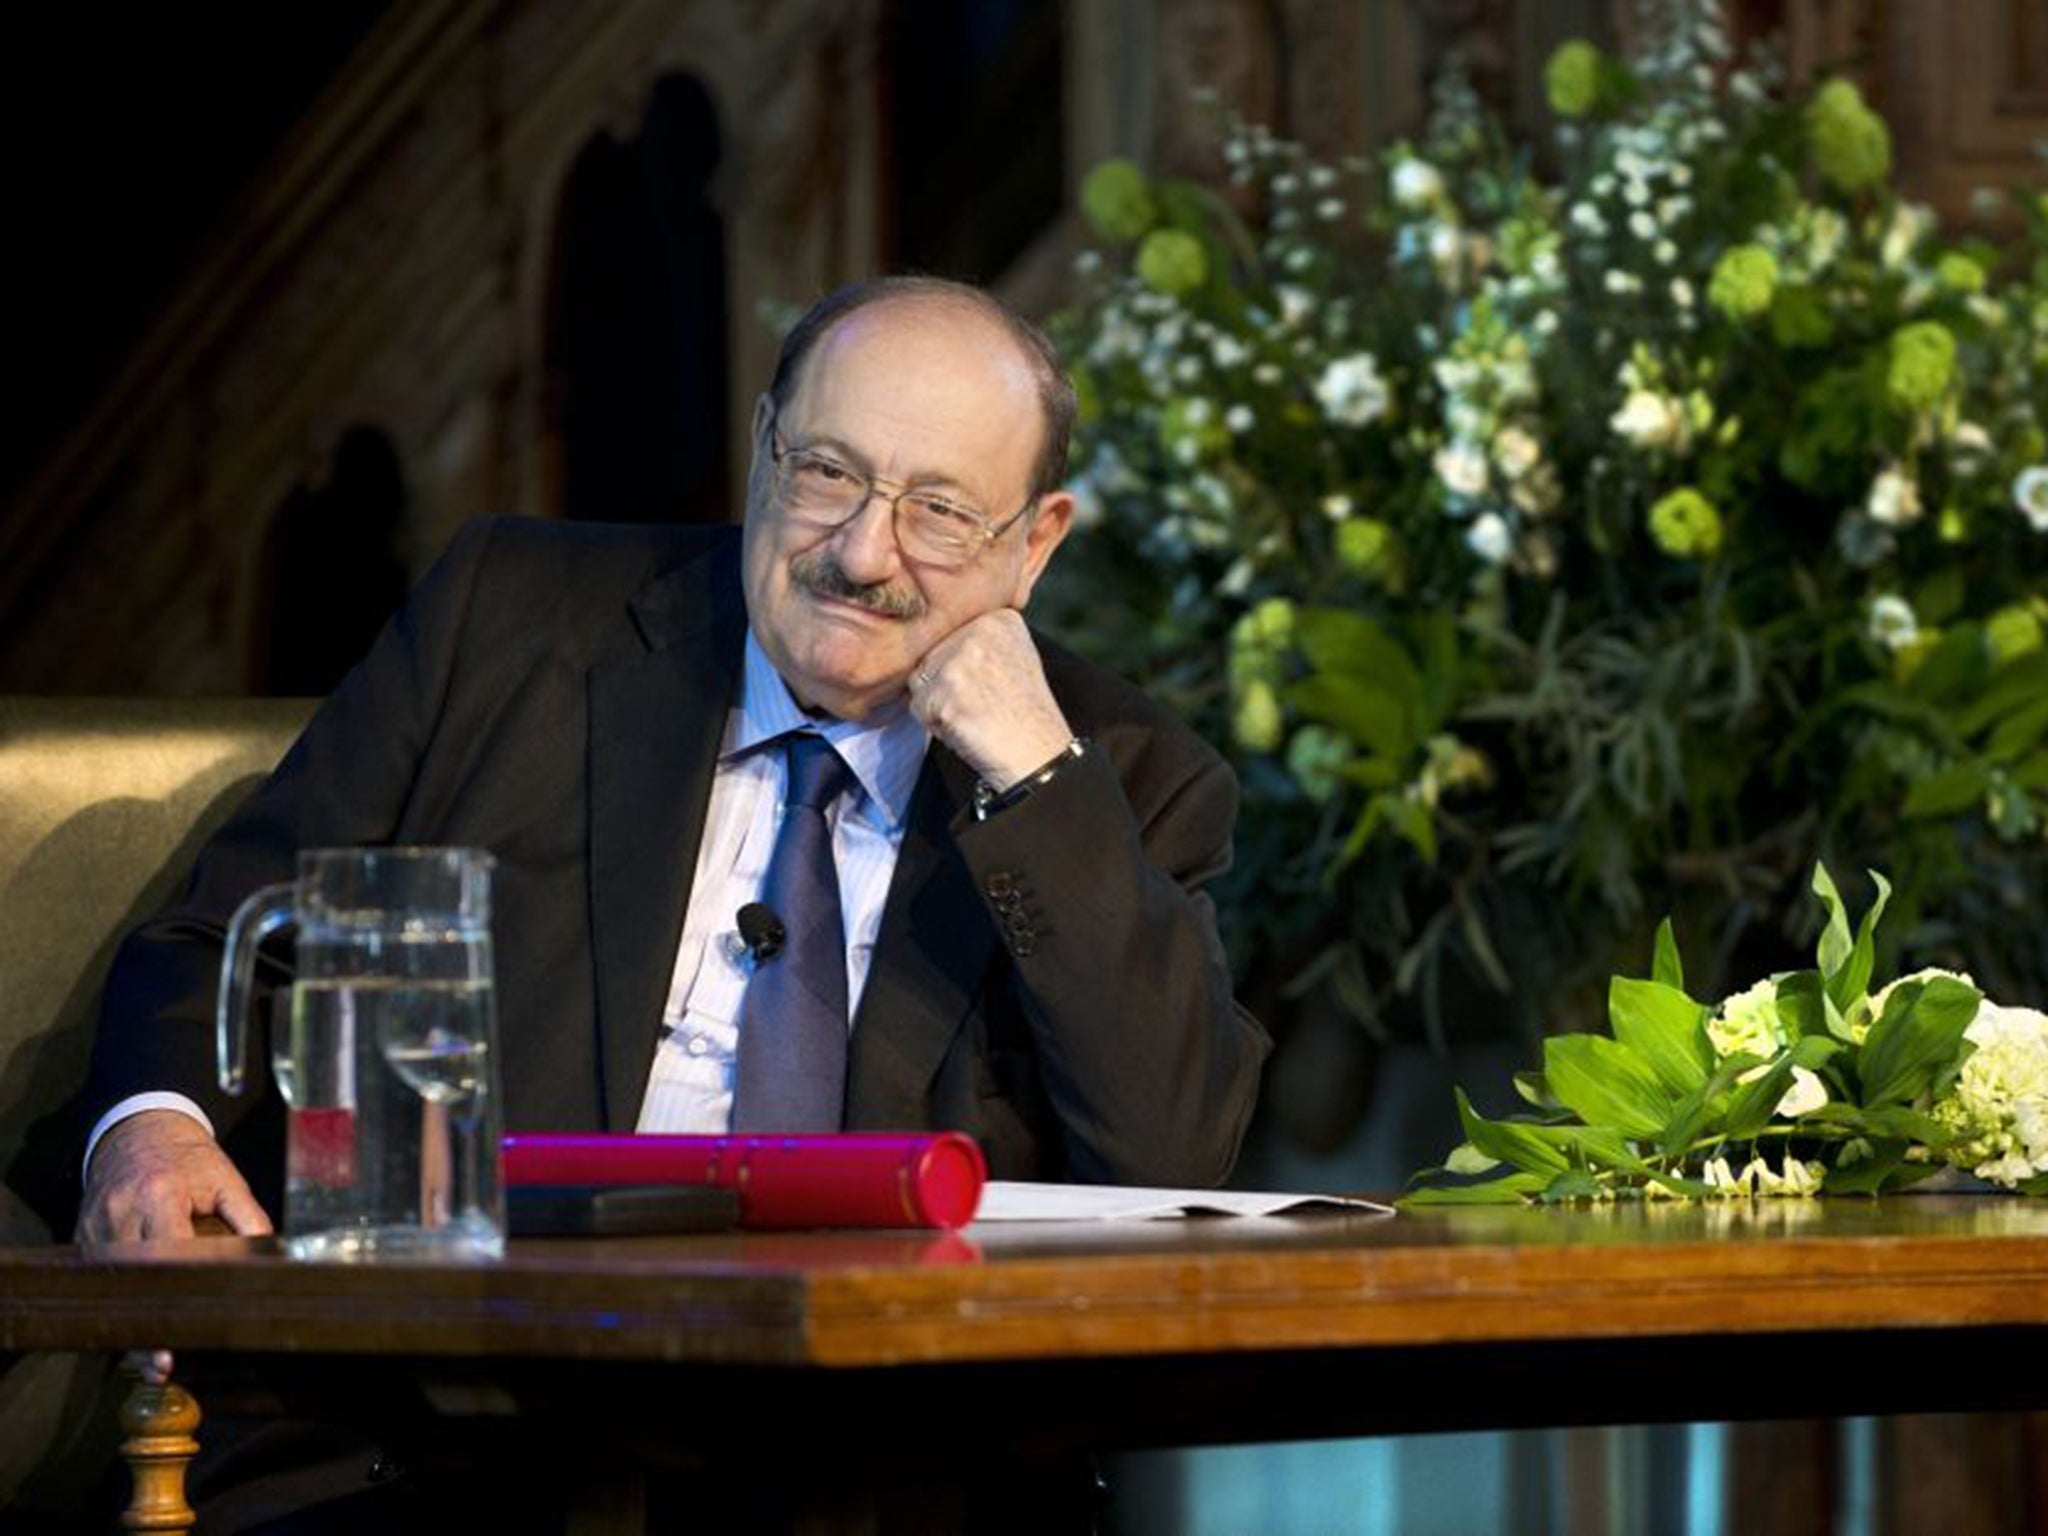 Umberto Eco died after suffering from cancer